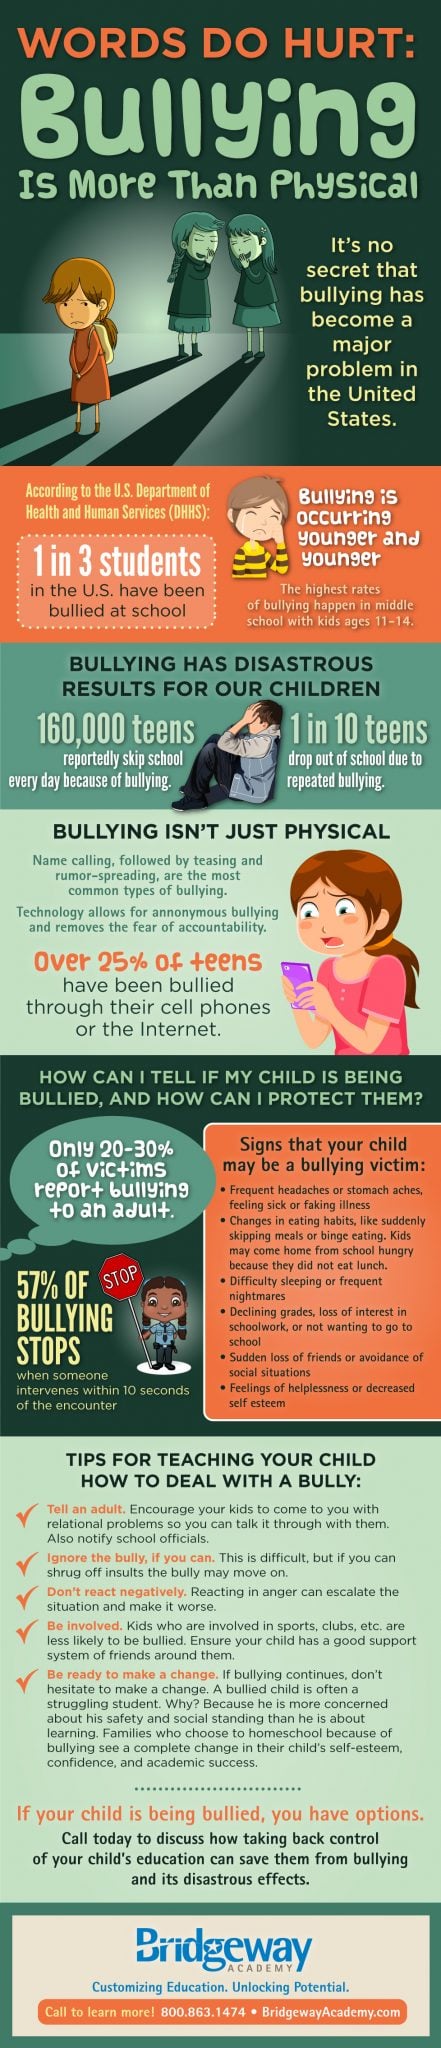 Bullying is More than Physical image